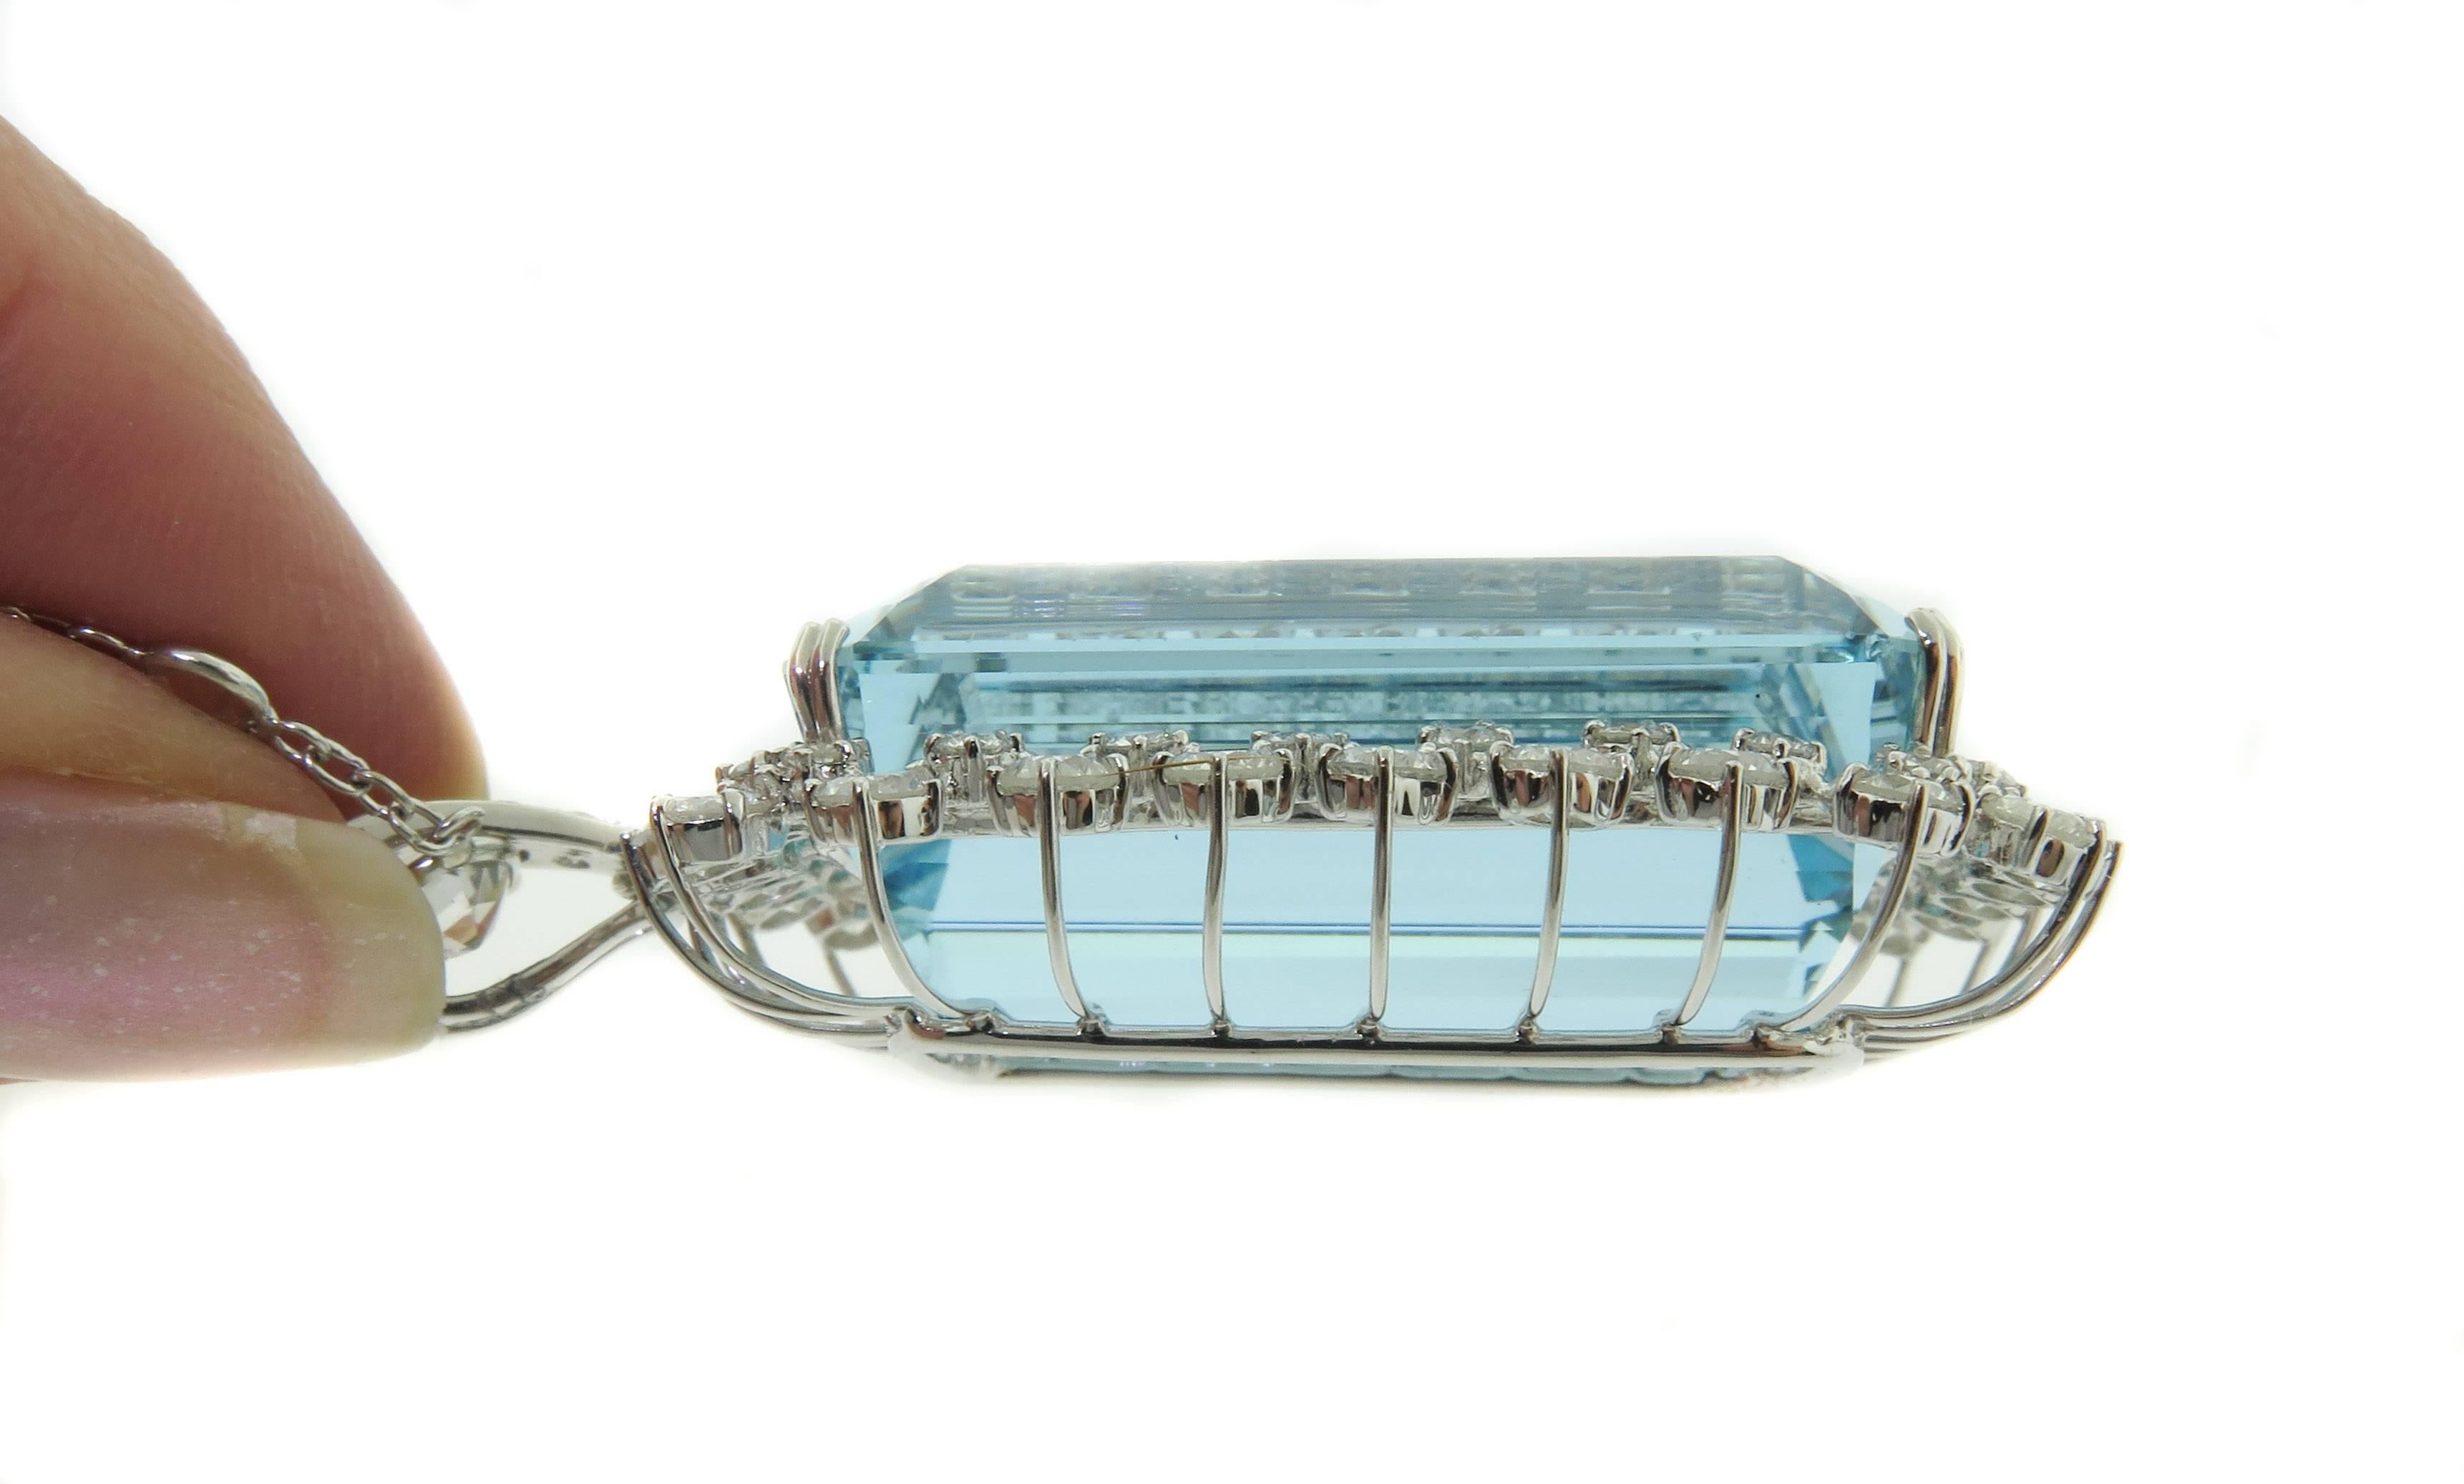 A Stunning Necklace!!  Showcasing a 71.34 carat emerald cut Aquamarine suspended by a double strand Diamonds by the yard style necklace with a total weight of 4.13 carats total weight.
This Aquamarine has a brilliant blue hue and clarity that is